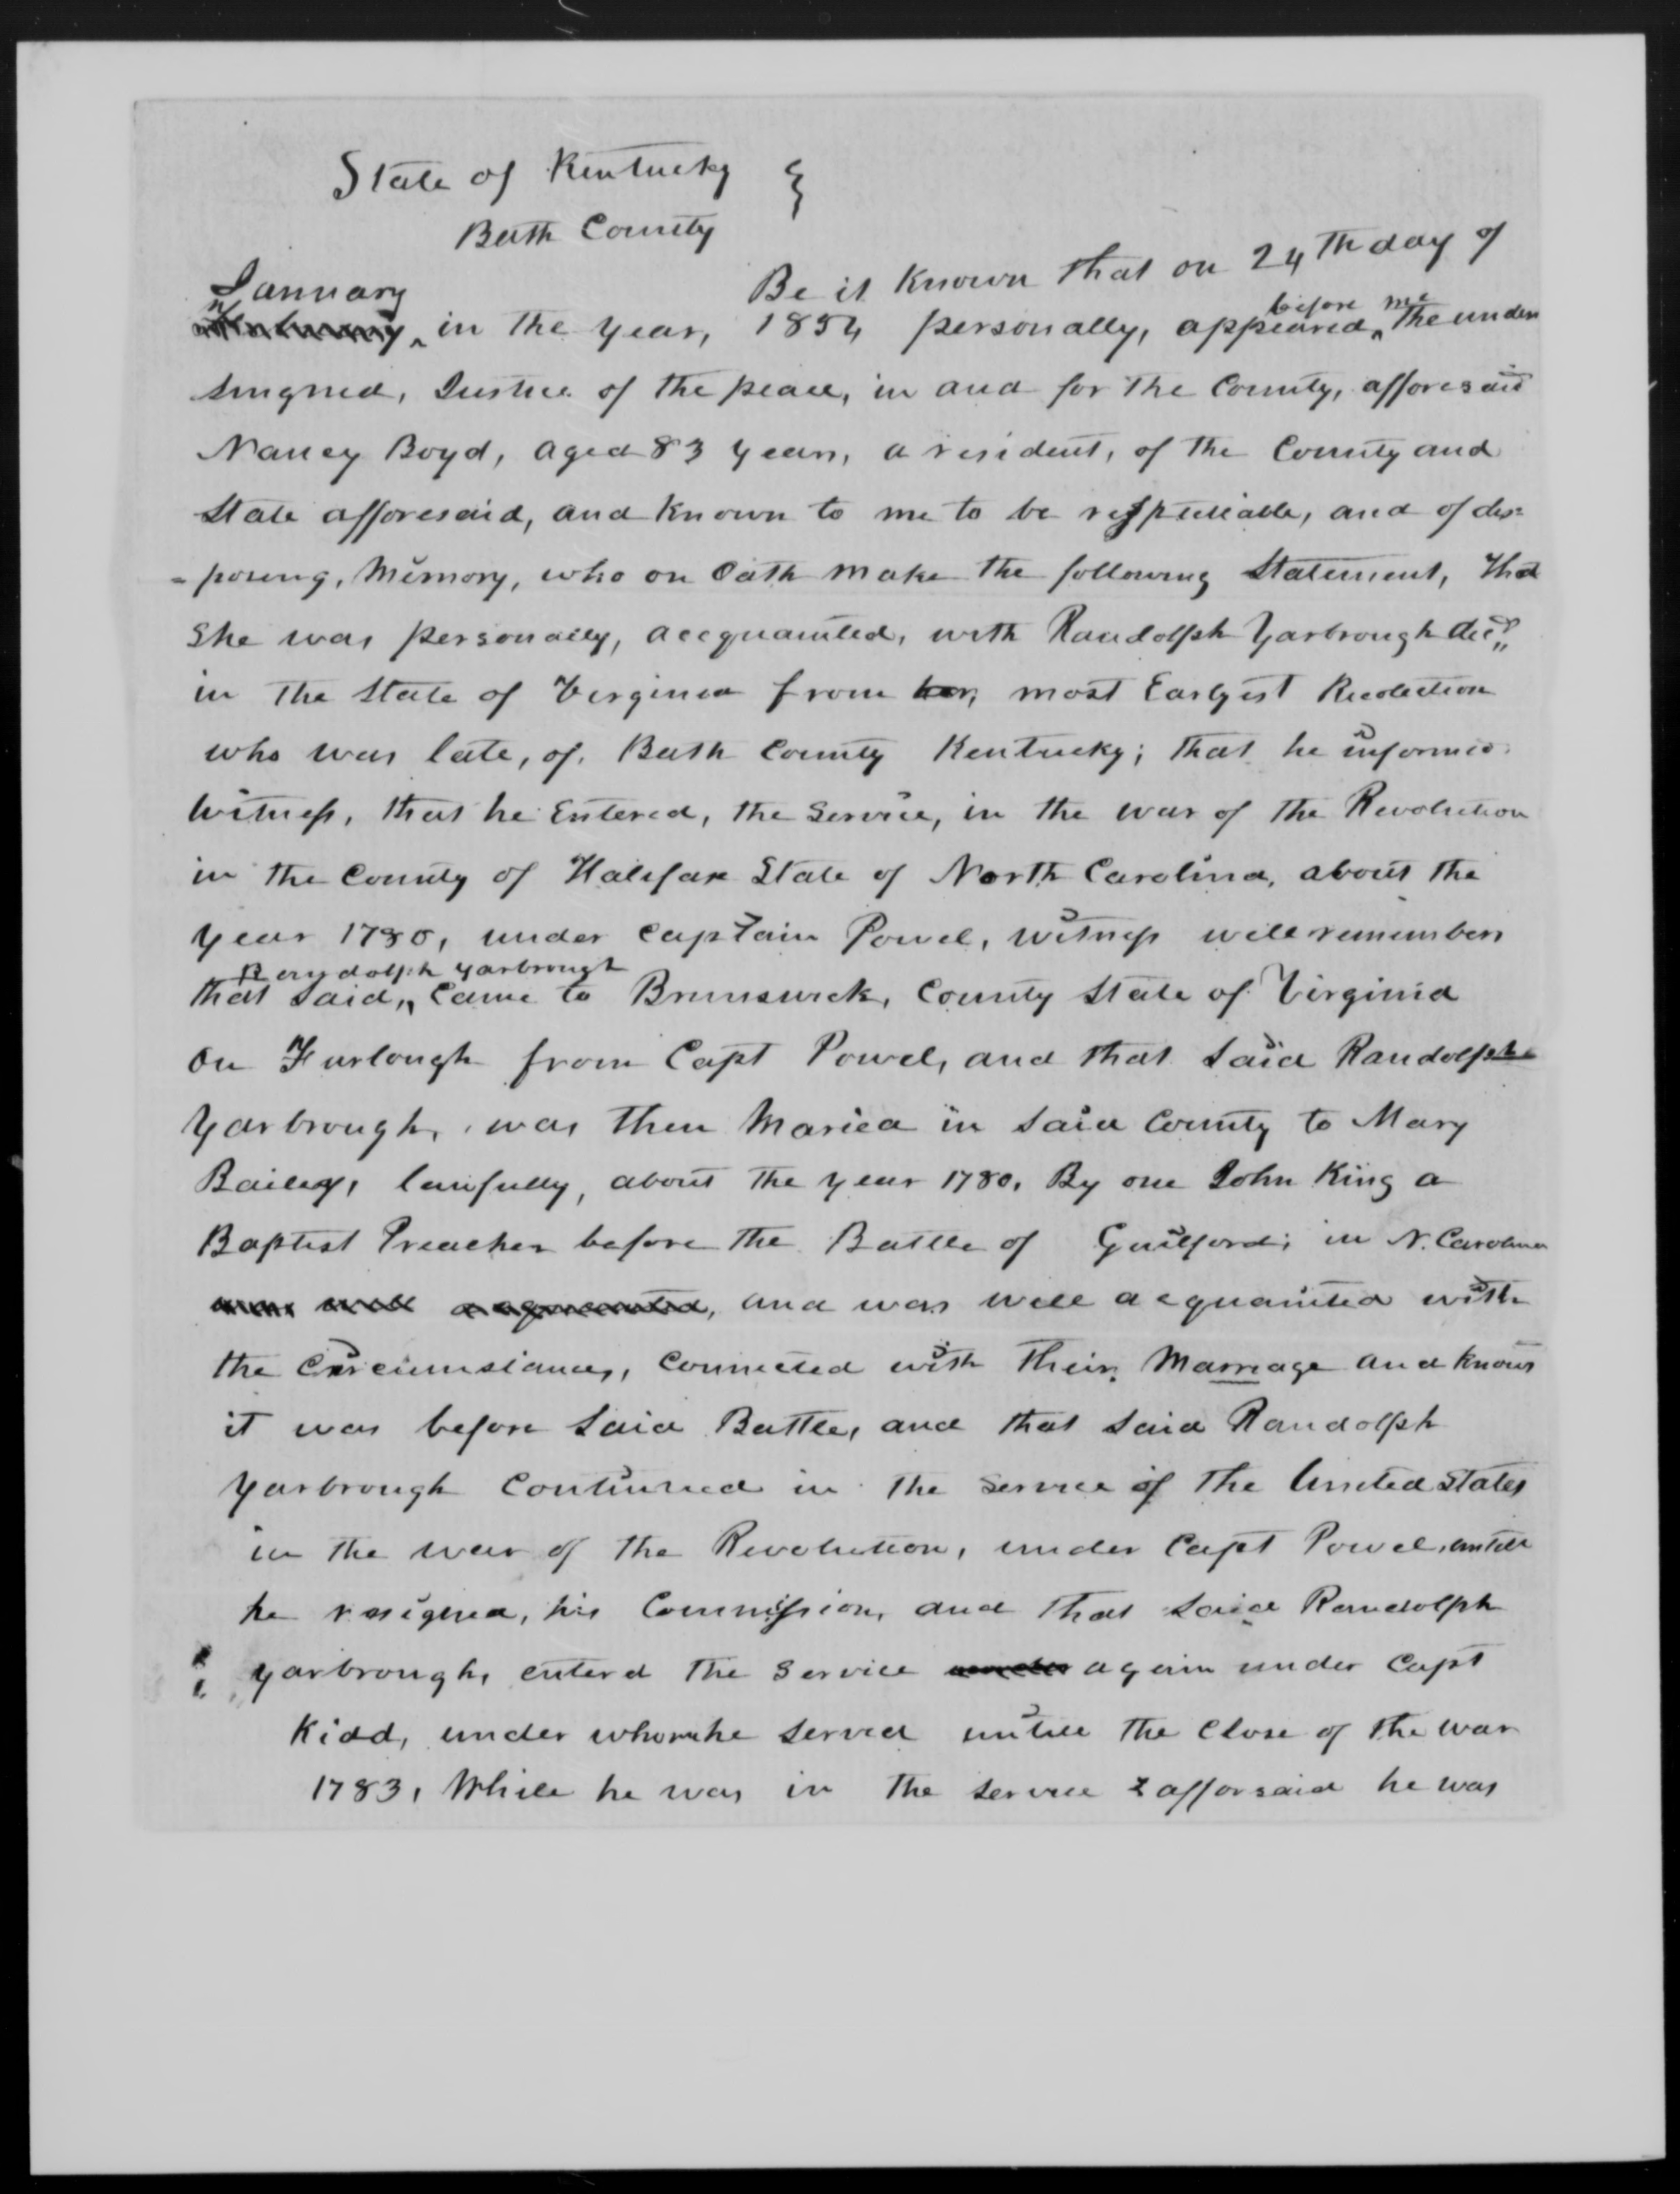 Affidavit of Nancy Boyd in support of a Pension Claim for Mary Yarborough, 24 January 1854, page 1